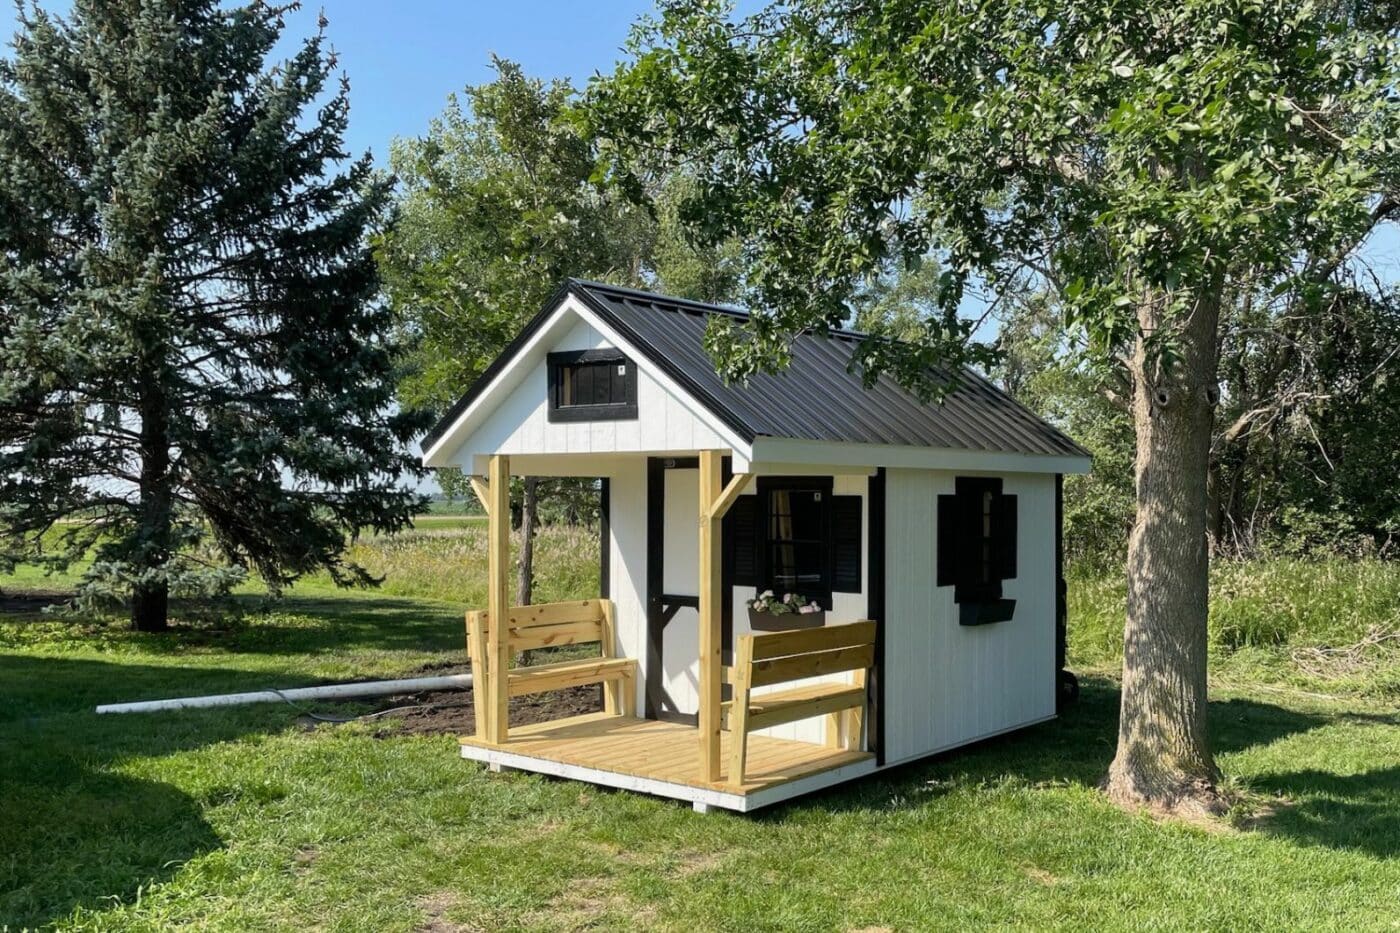 White playhouse shed in backyard